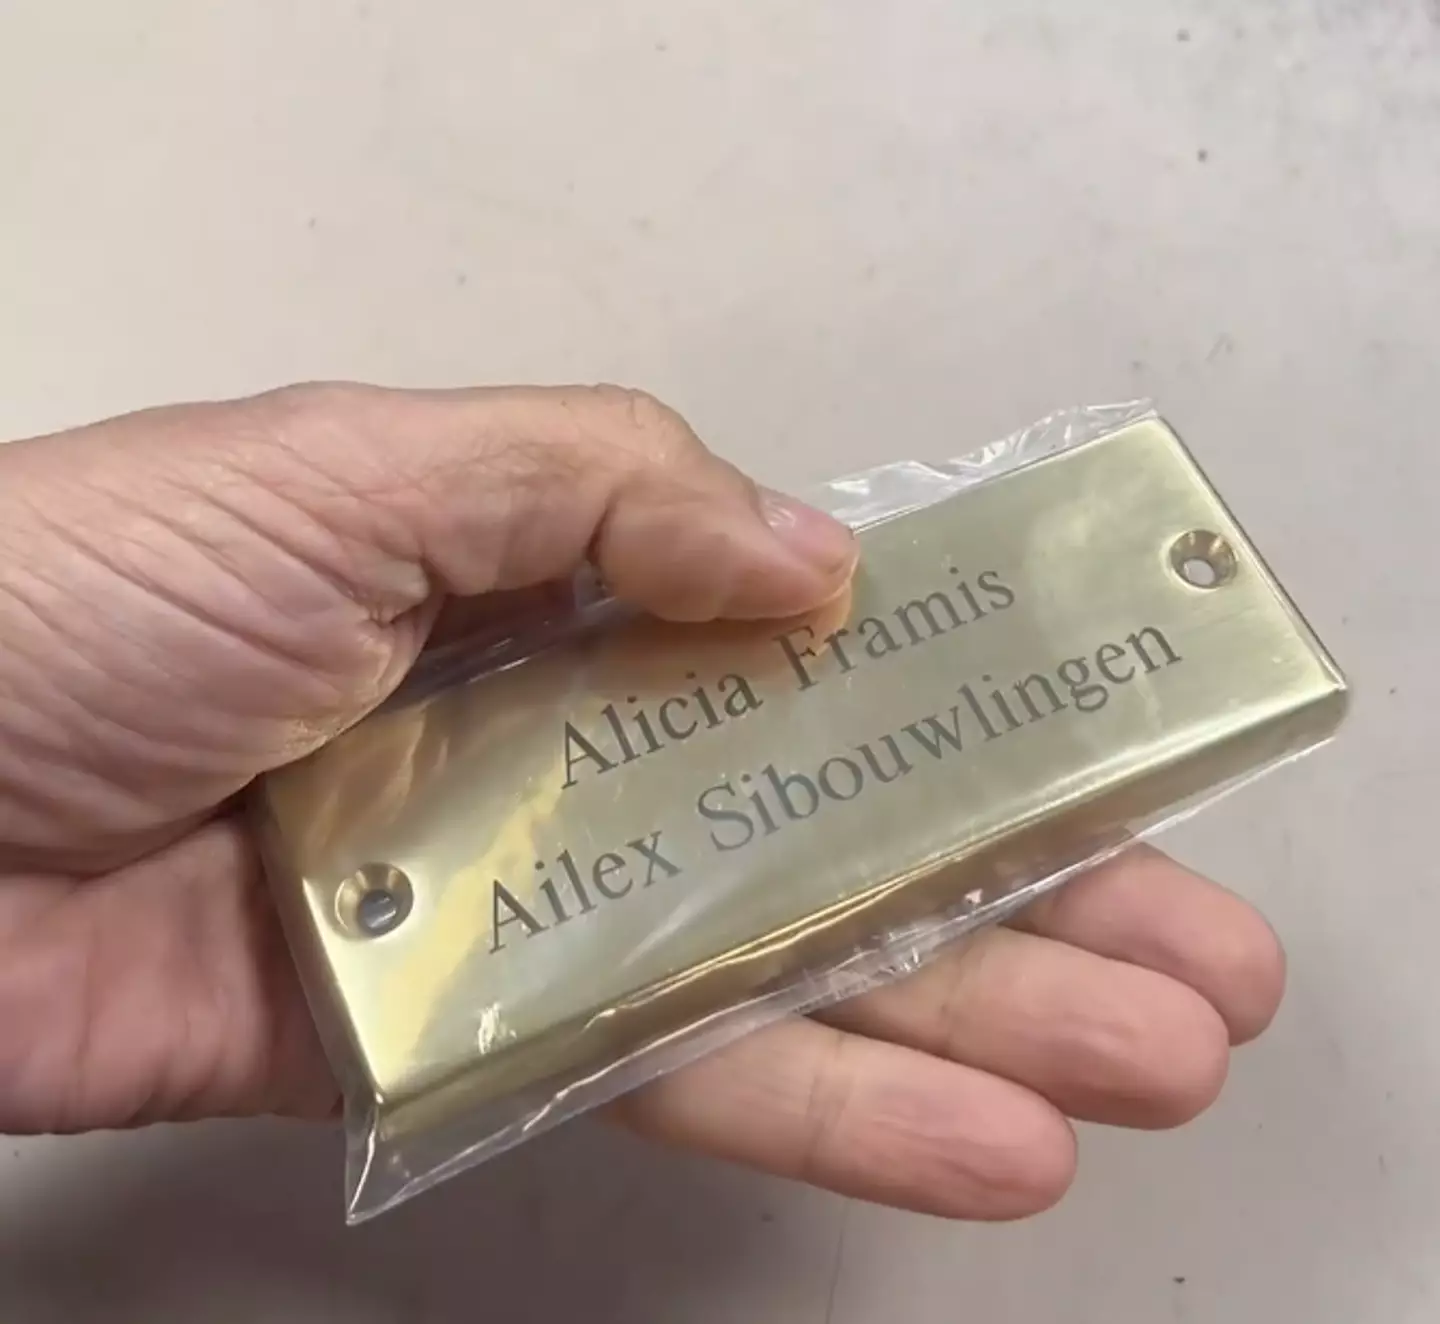 Alicia had a brass plaque made with both of their names engraved.